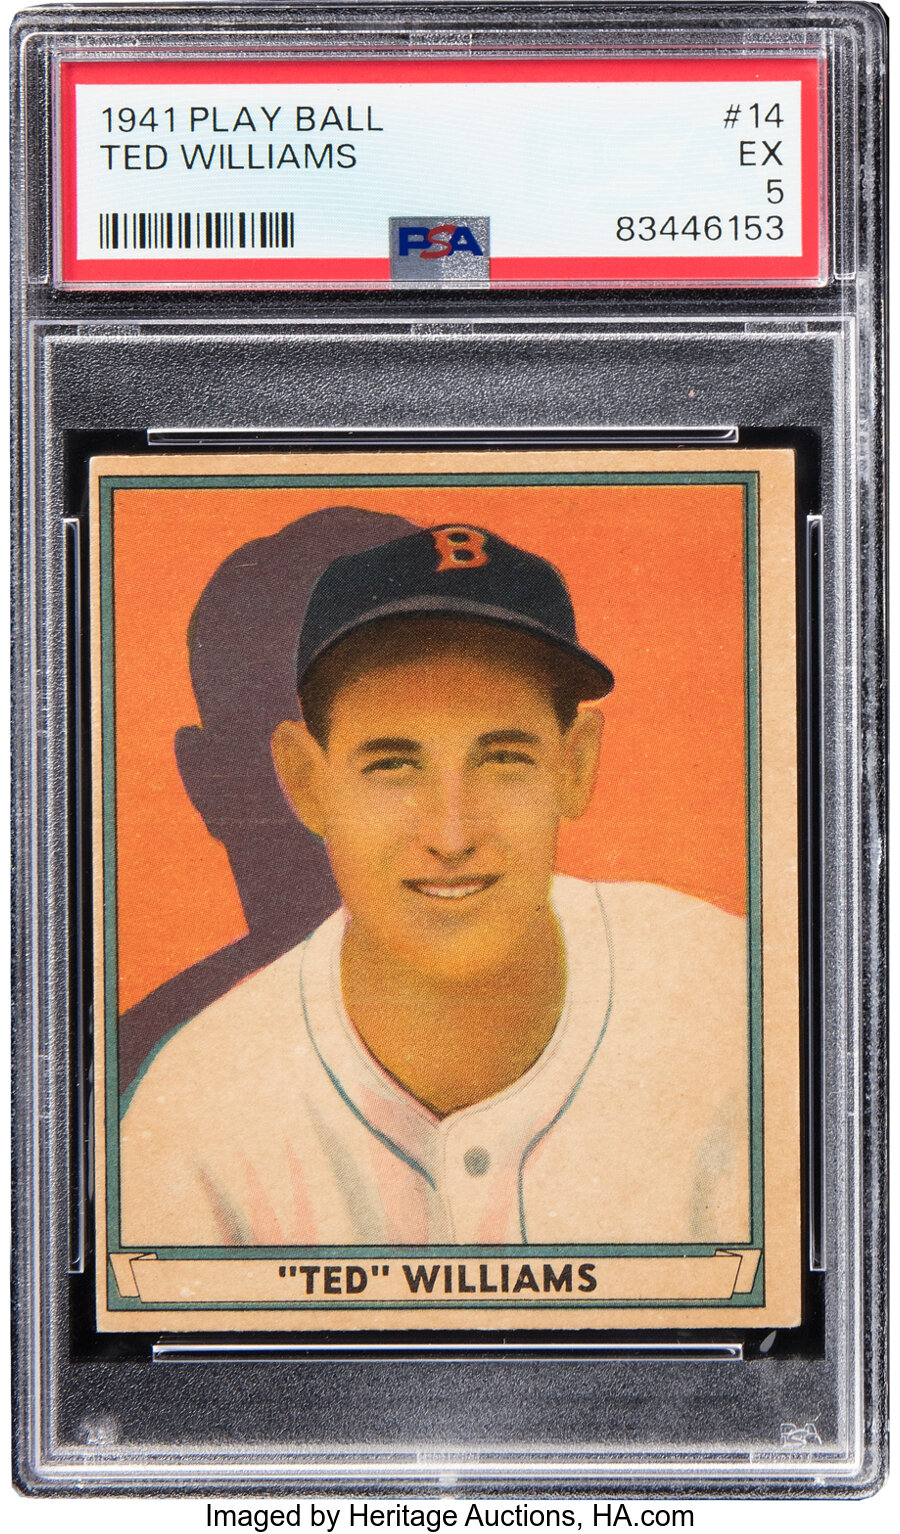 1941 Play Ball Ted Williams #14 PSA EX 5